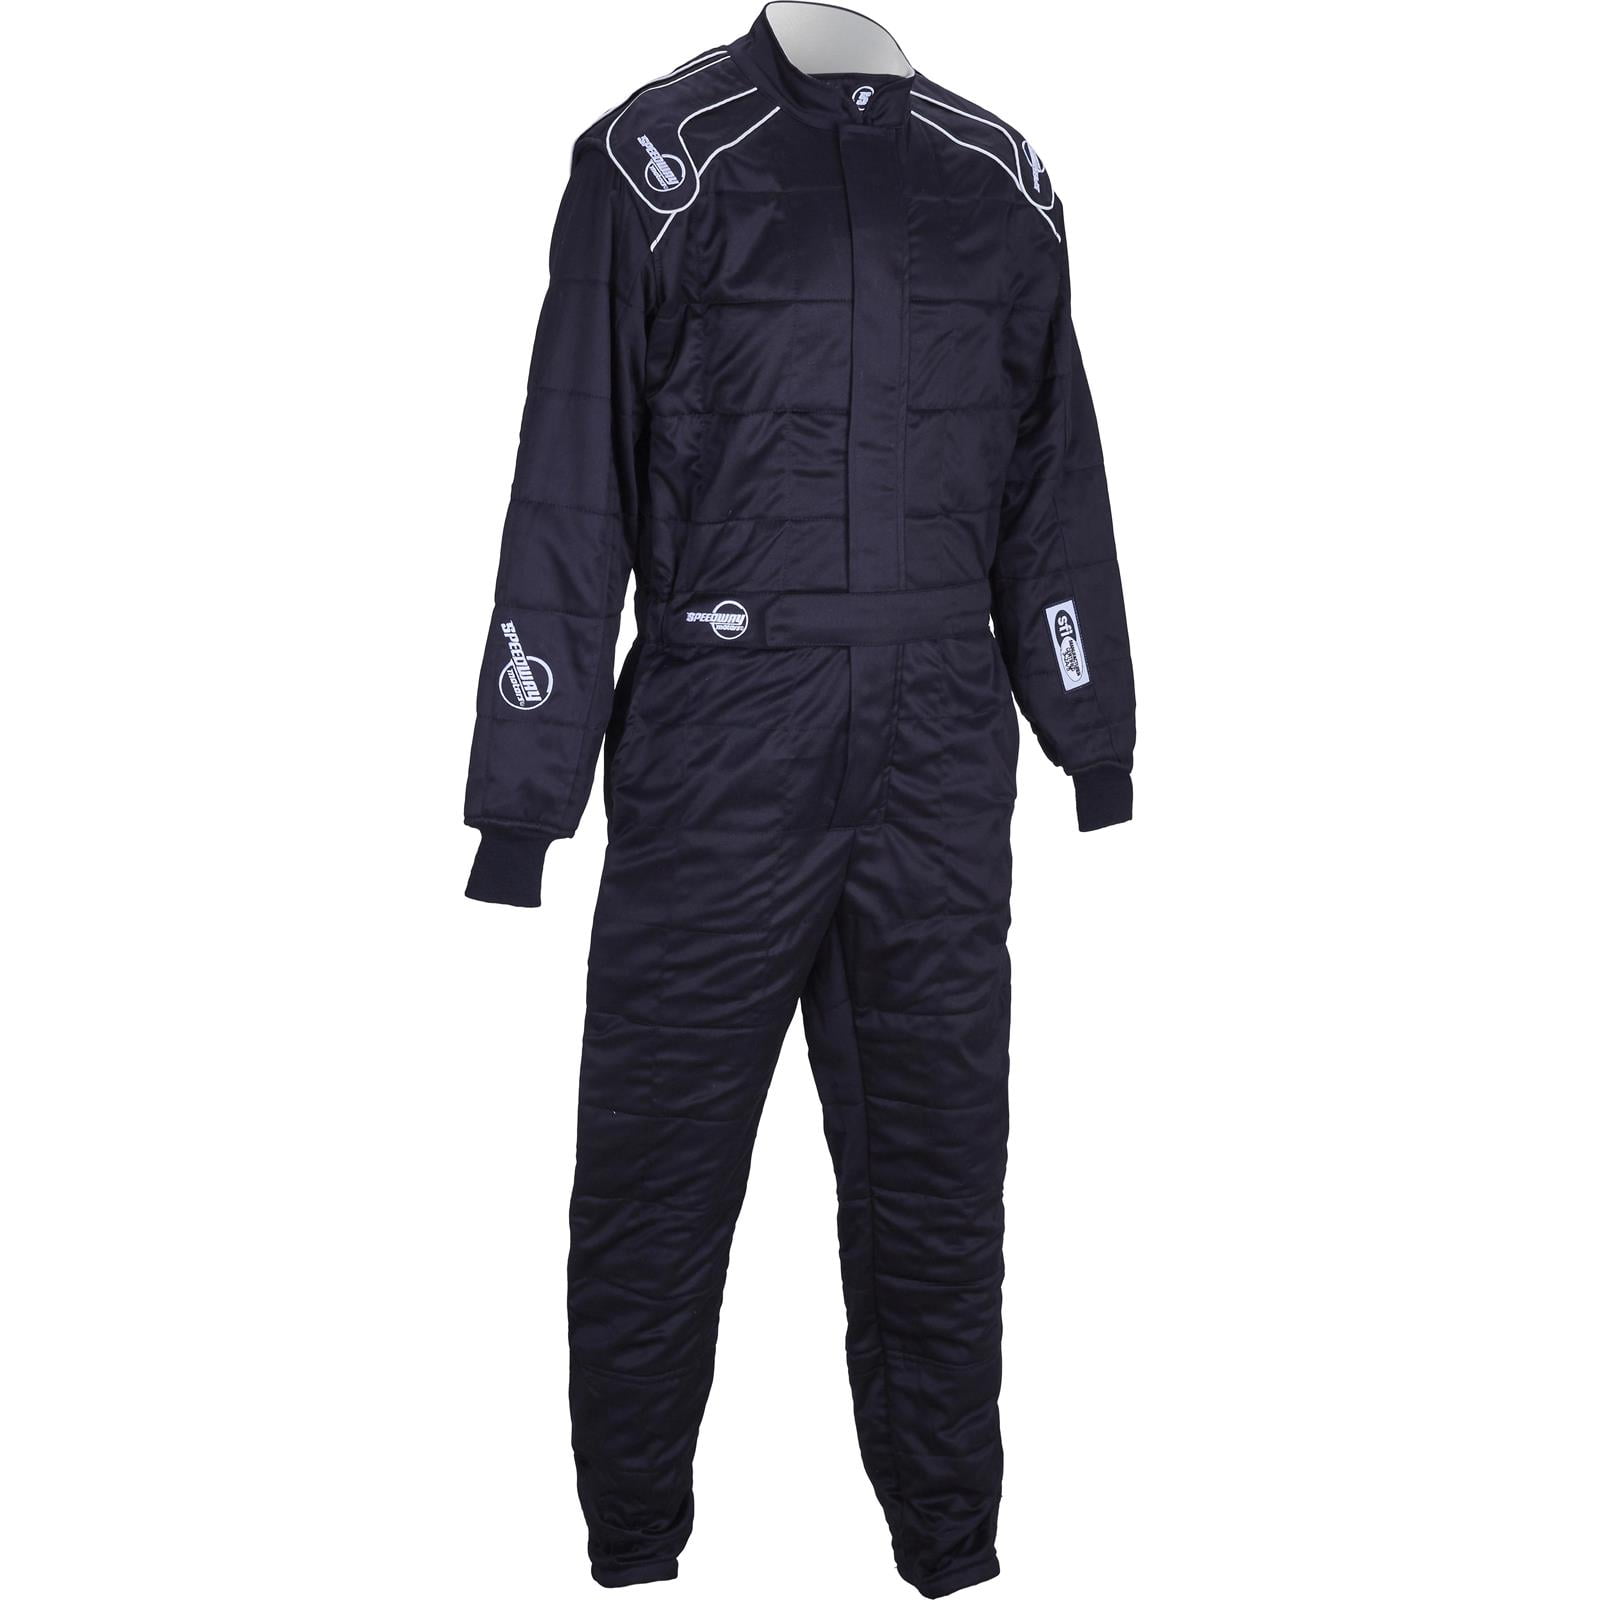 one-piece quilted lined thermal suit, Endurance waterproof padded coverall 